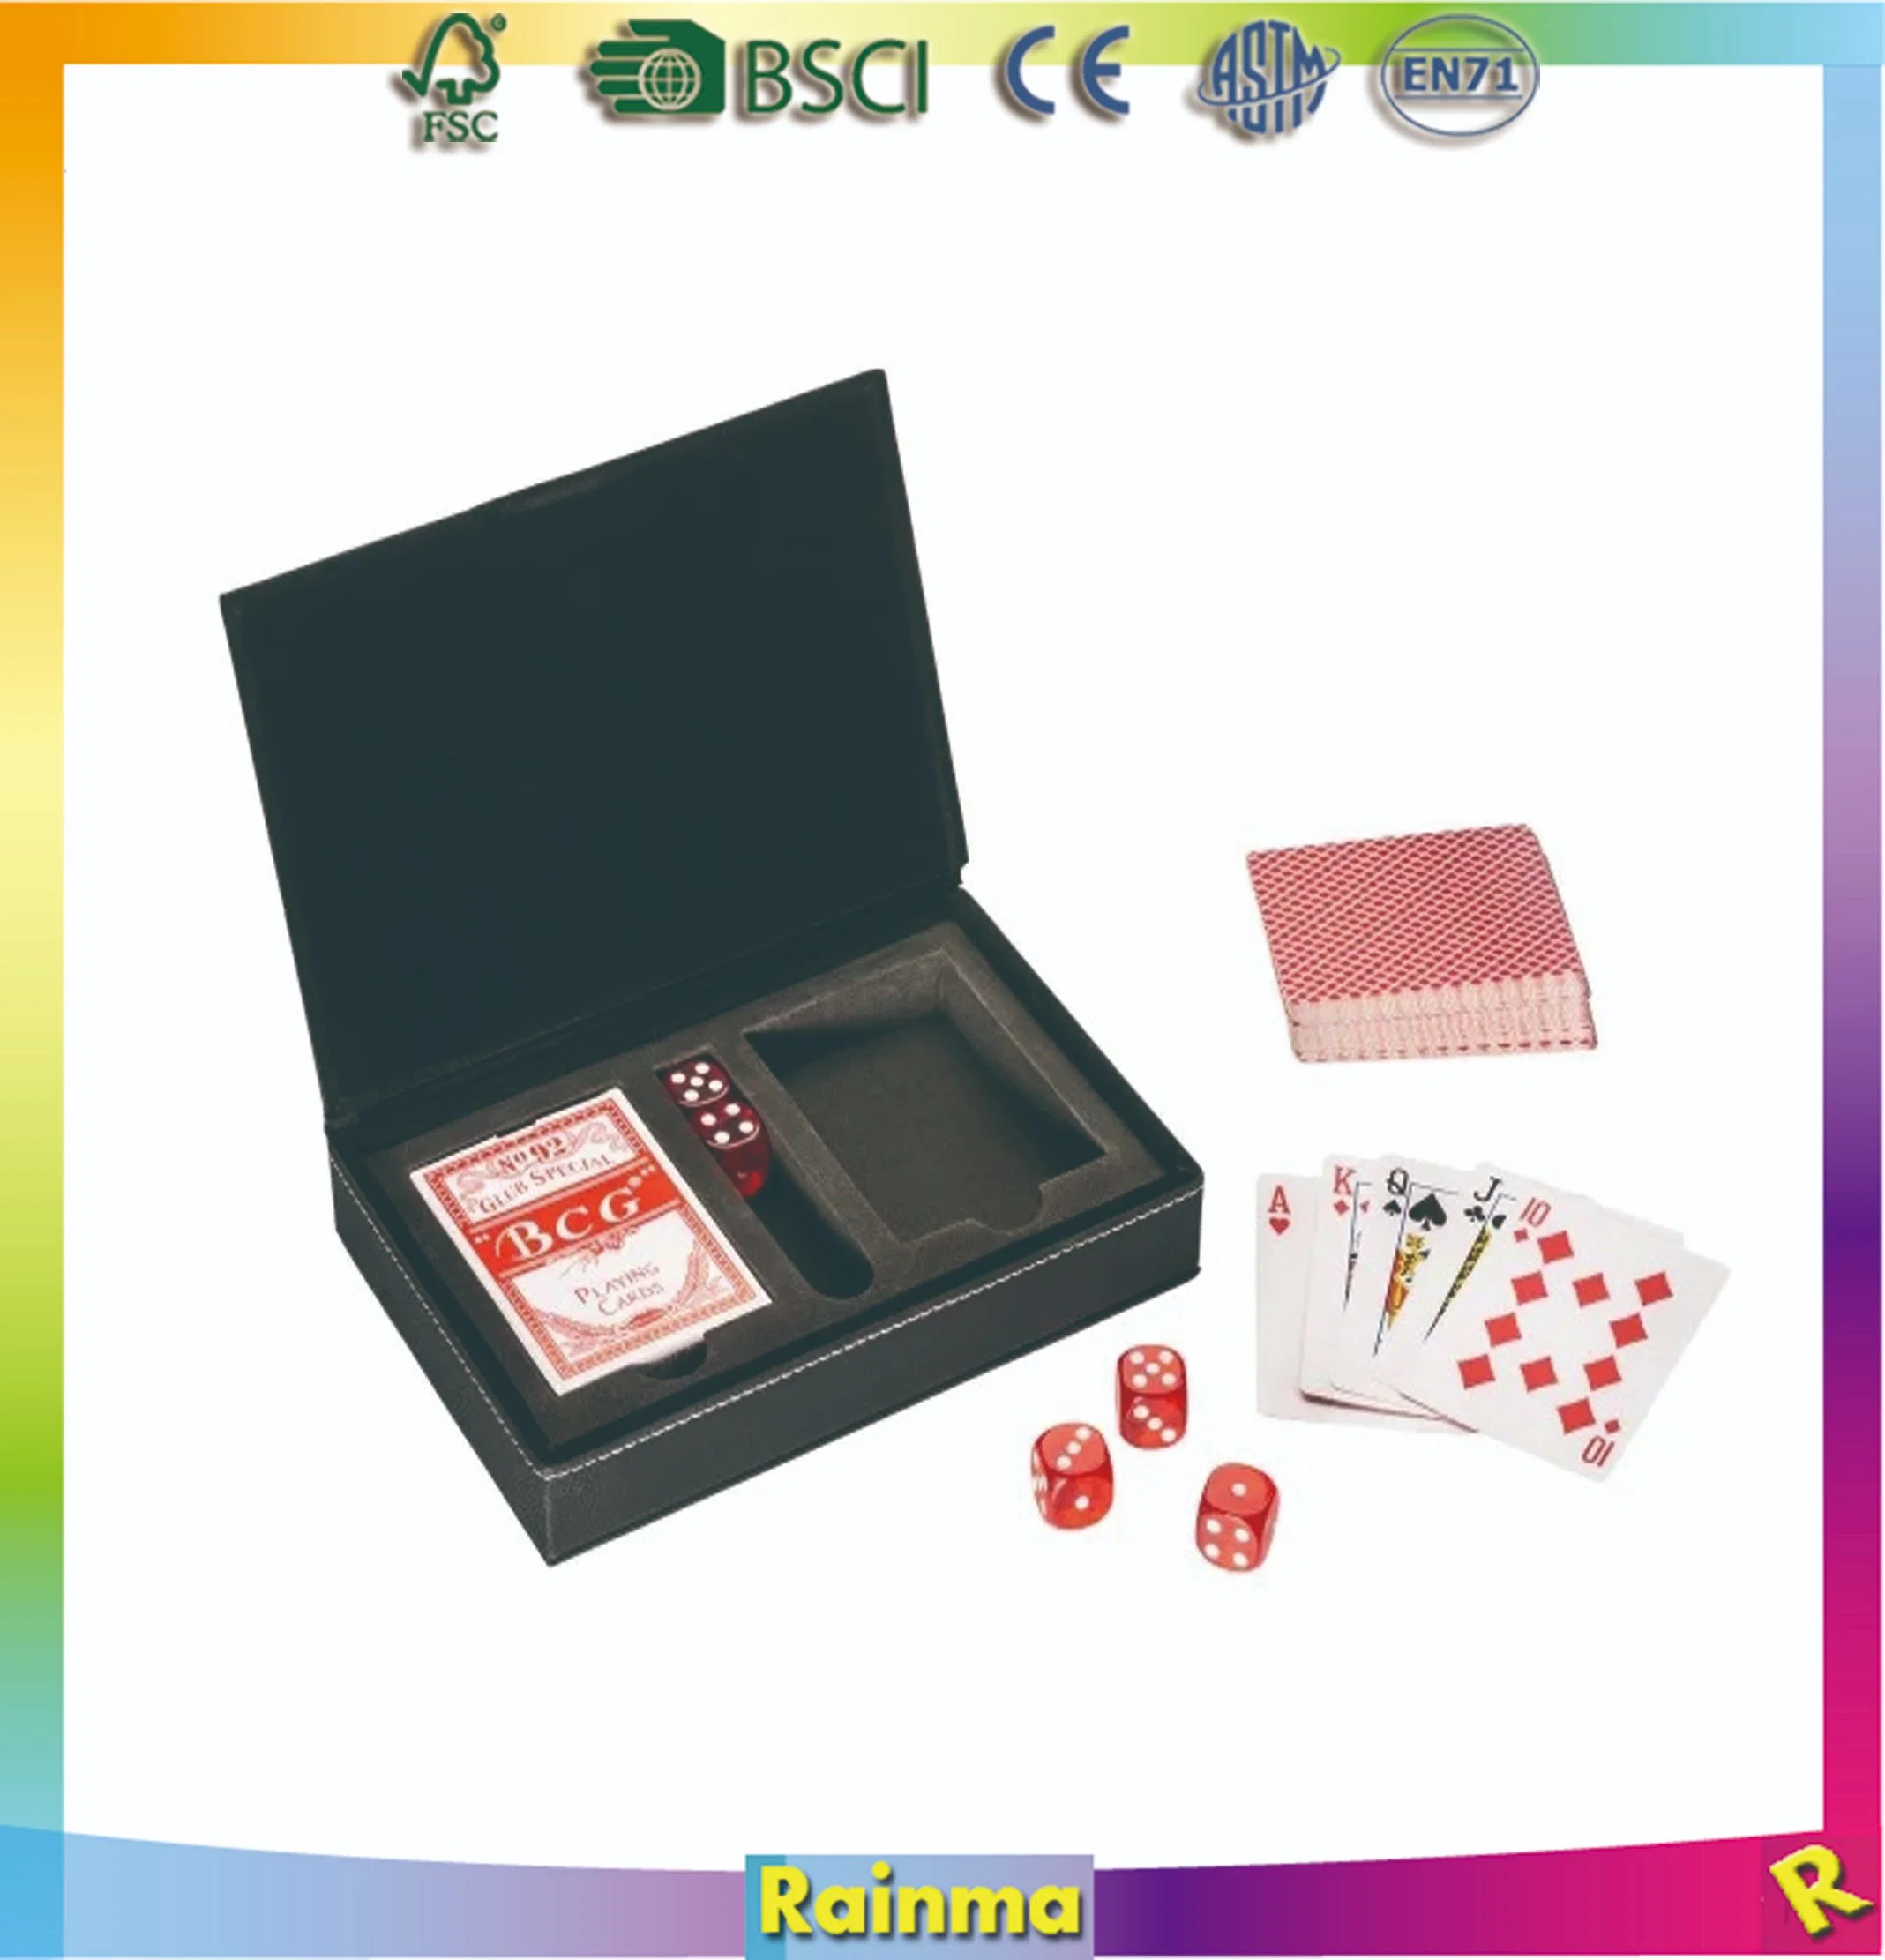 Playing Card Case Used for Multiplayer Games and Promotion